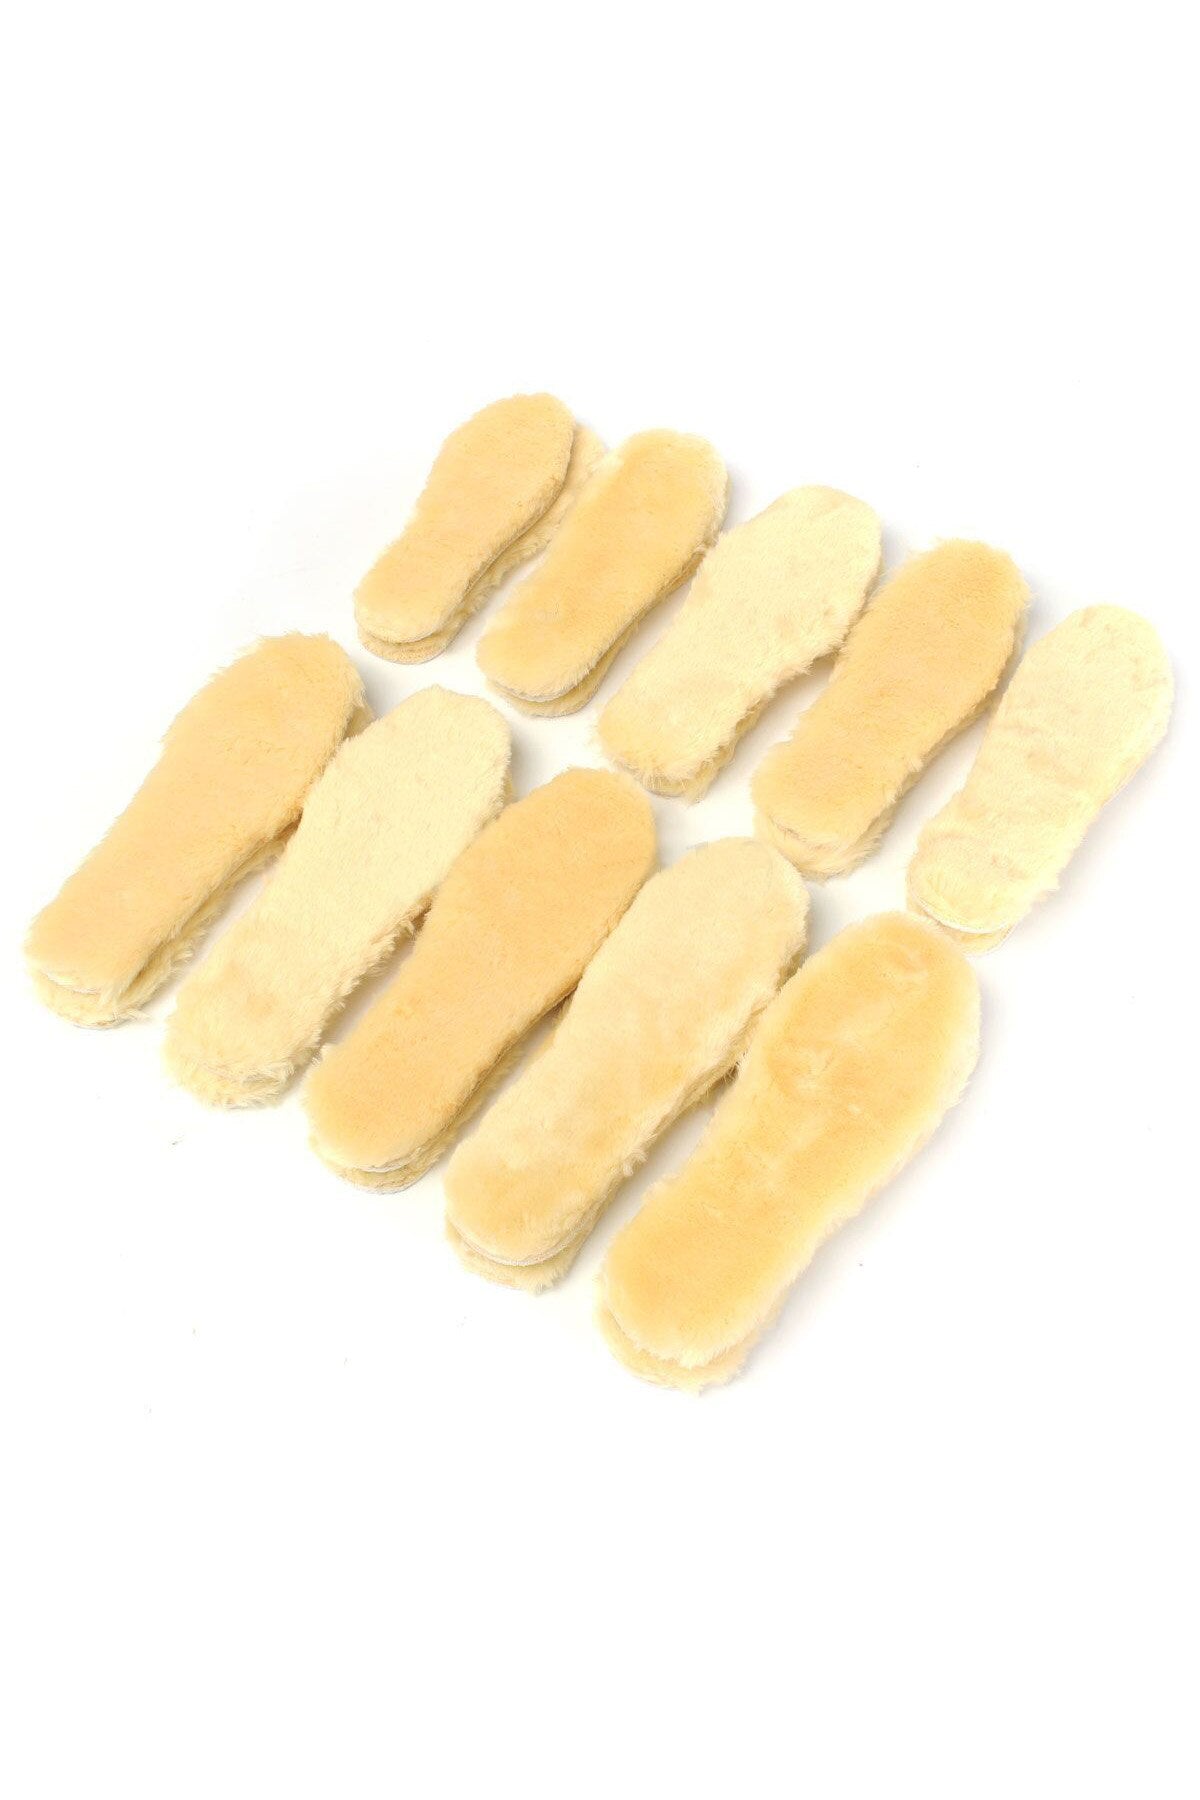 Men Women Insoles Pads Replacement For Winter Shoes Boots Rainboots Yellow - ebowsos